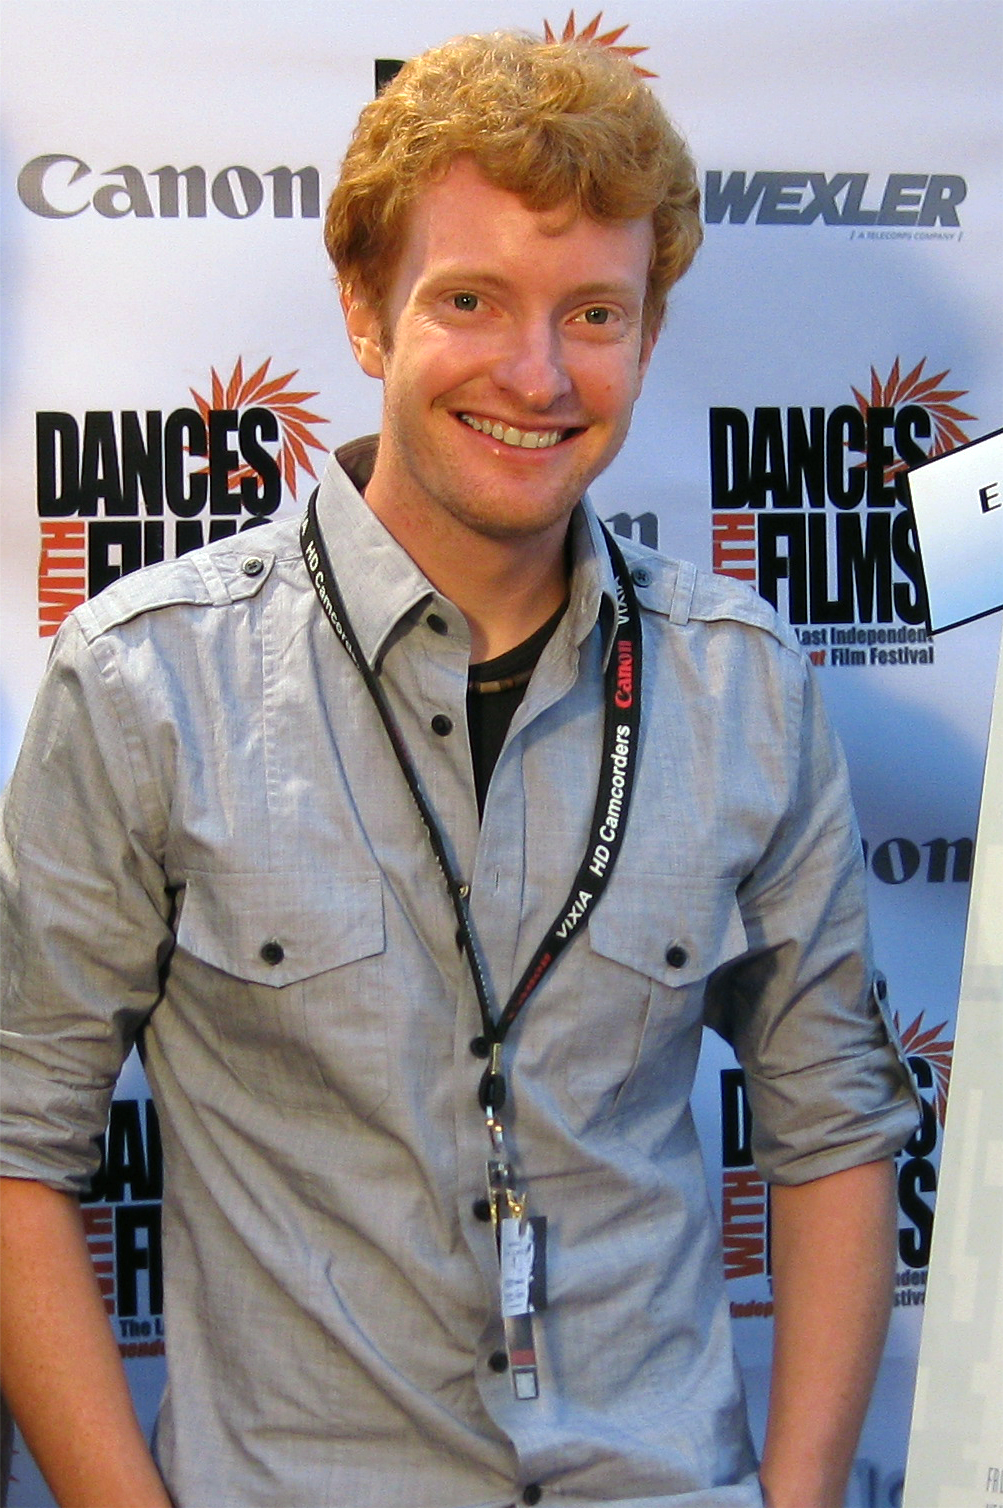 Matt Shumway at Dances With FIlms Independent Film Festival